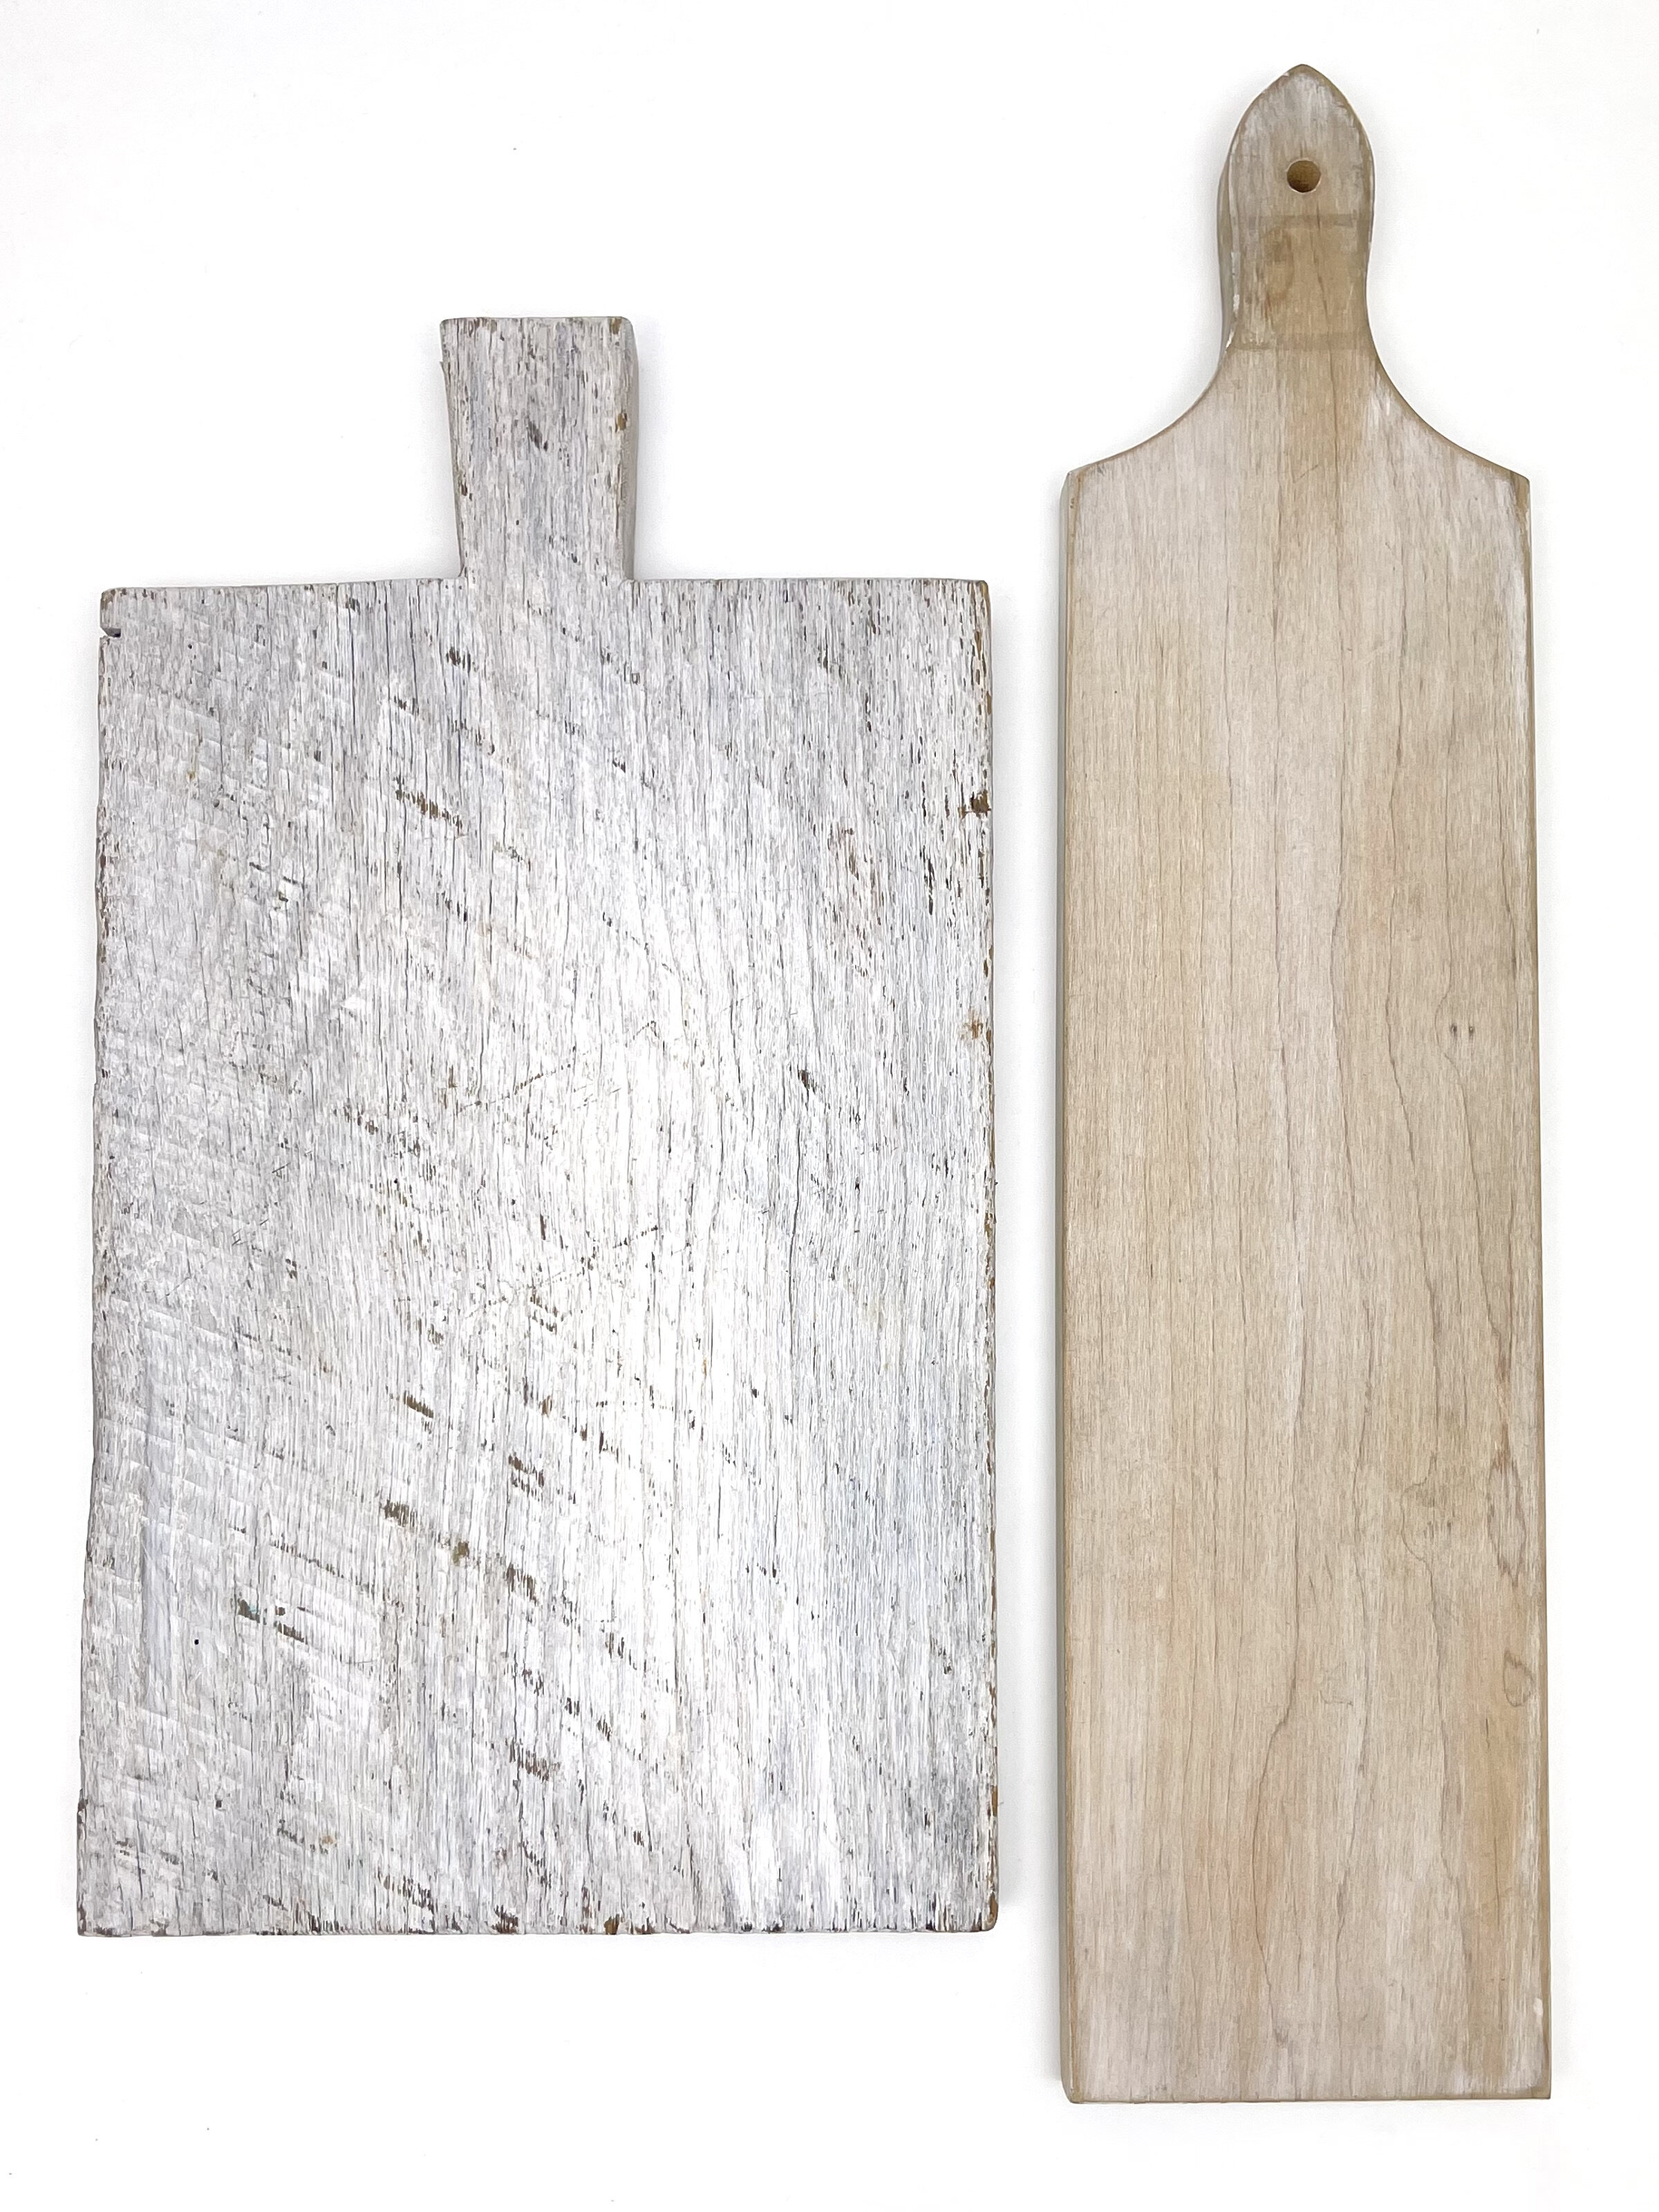 https://images.squarespace-cdn.com/content/v1/5f7dec90902fc02c9f215fc2/1613692785821-GTCU8ZKY48W4LNXVB0T7/Whitewashed+cutting+boards+with+handles+3.jpeg?format=2500w